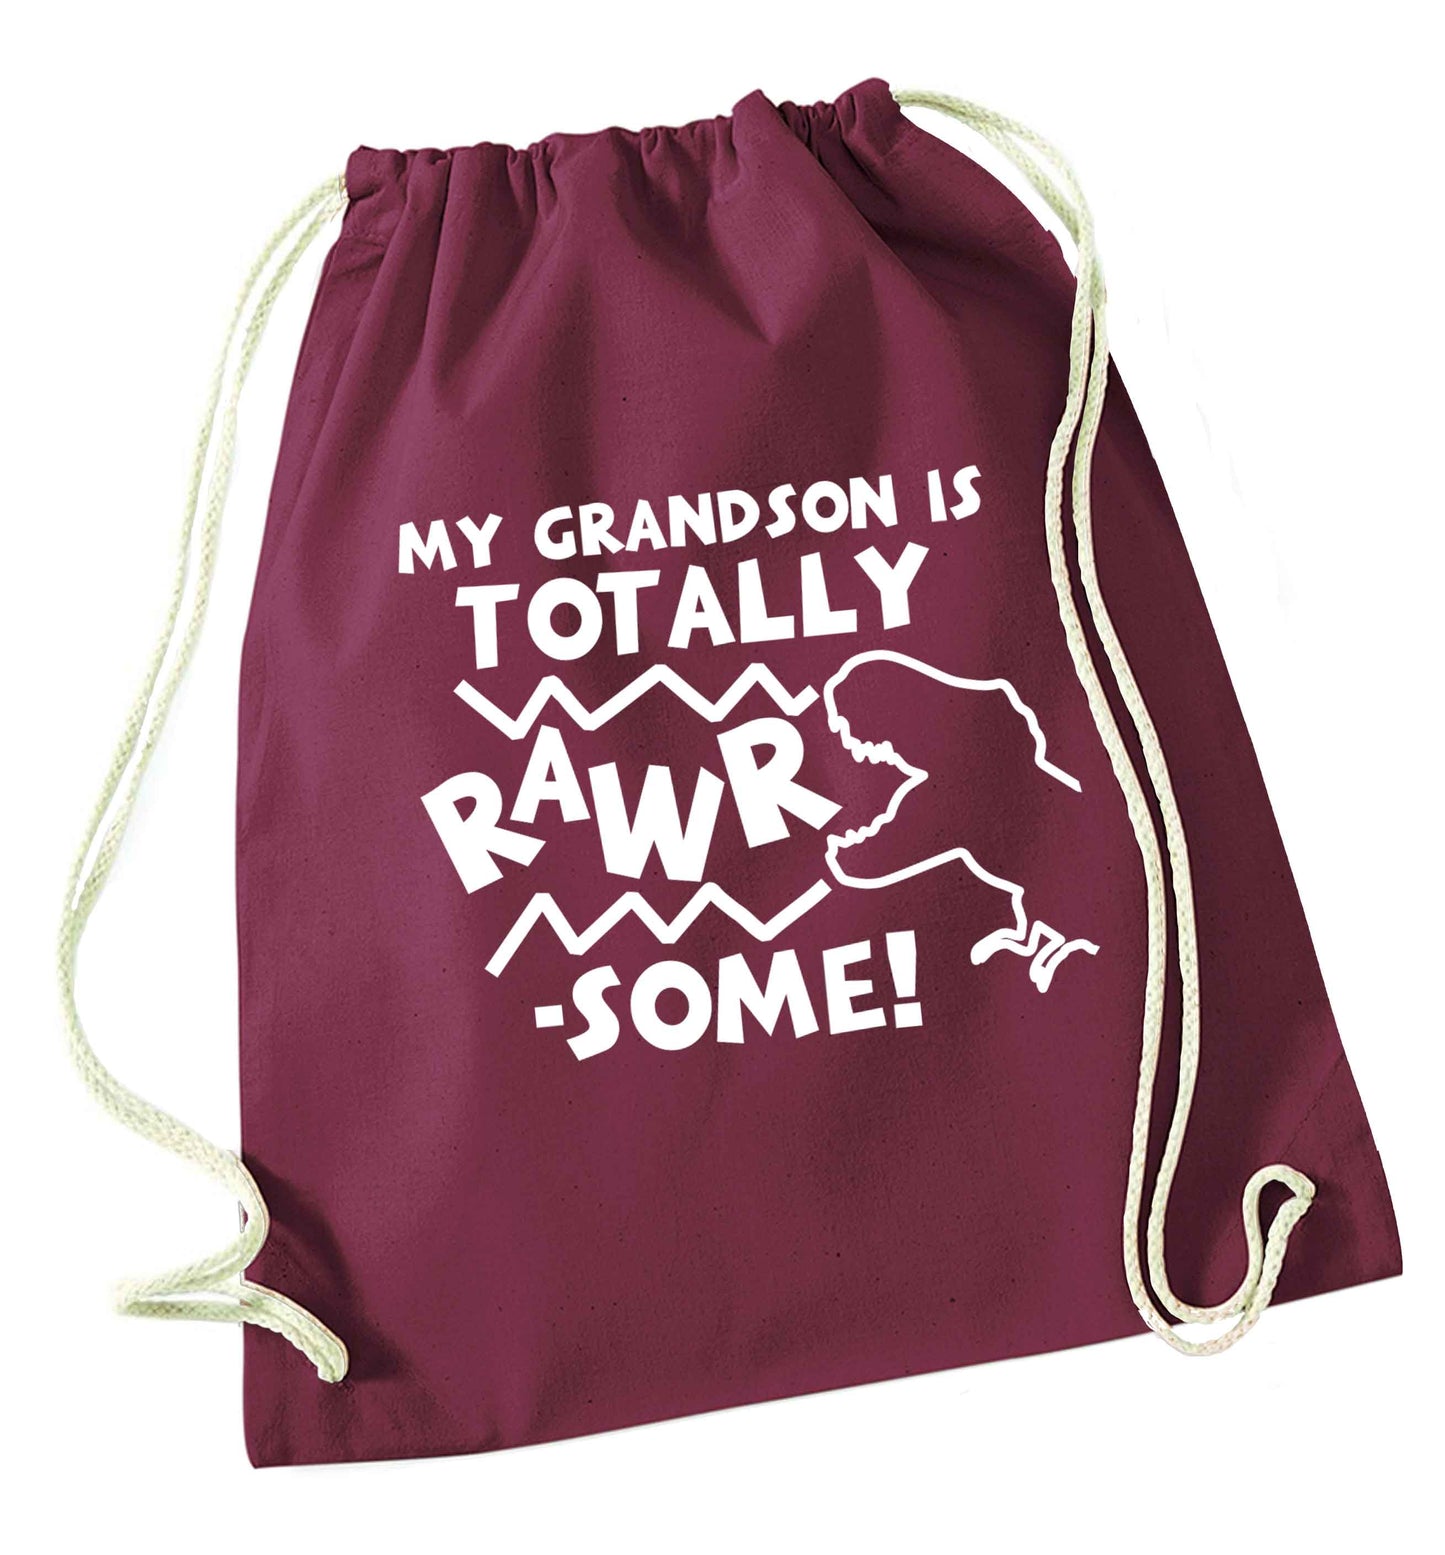 My grandson is totally rawrsome maroon drawstring bag